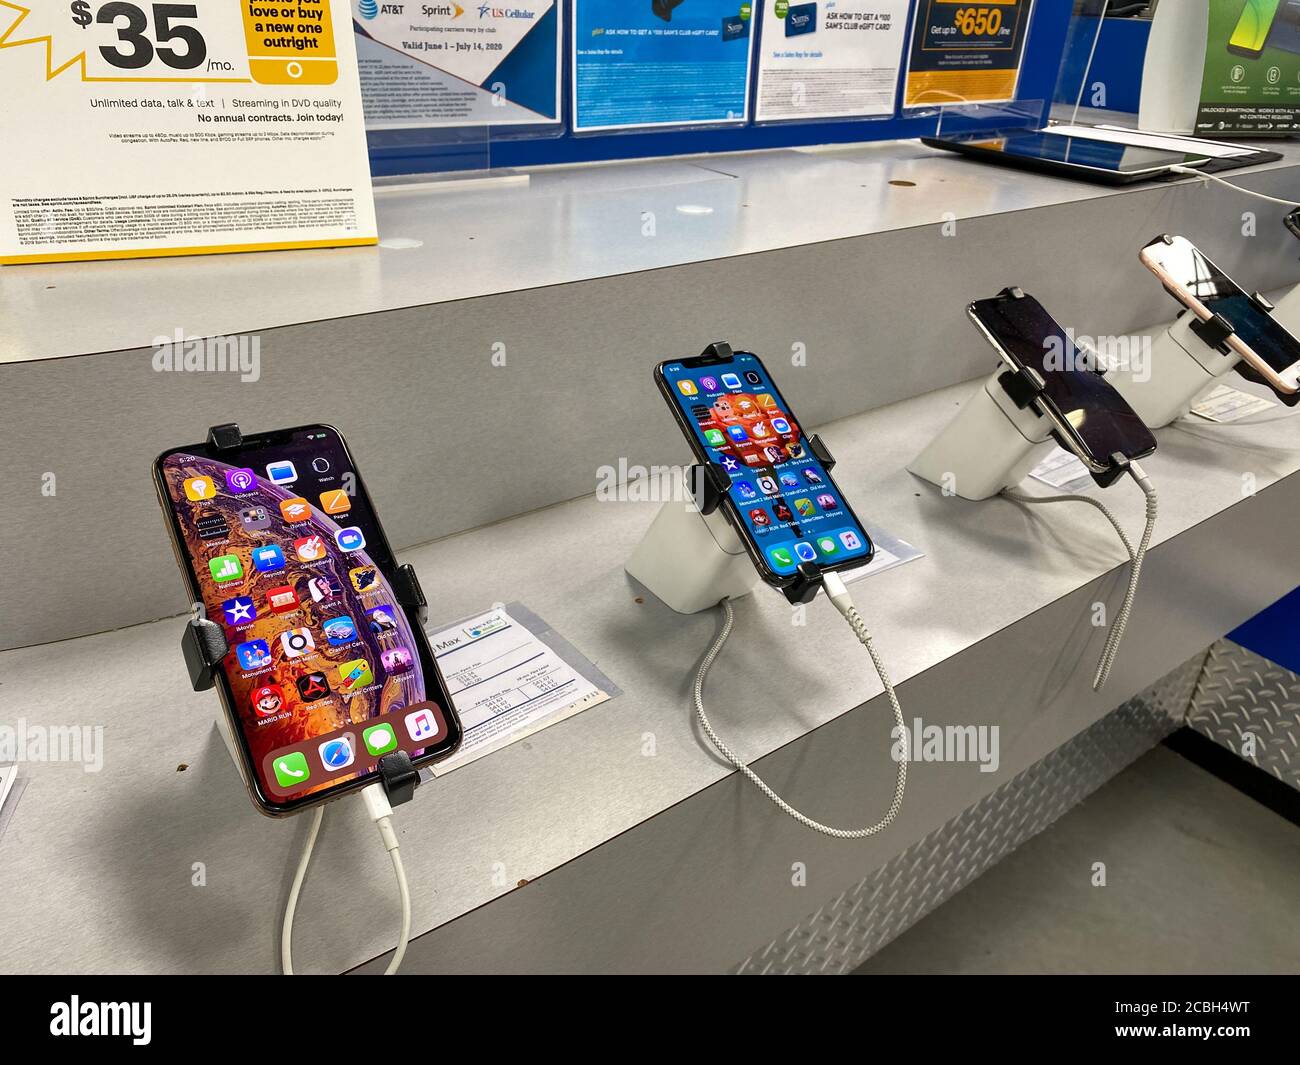 Orlando,FL/USA- 6/10/20: A row of Apple iPhone 11 and iPhone 11 Max for  sale at a Sam's Club in Orlando, Florida Stock Photo - Alamy